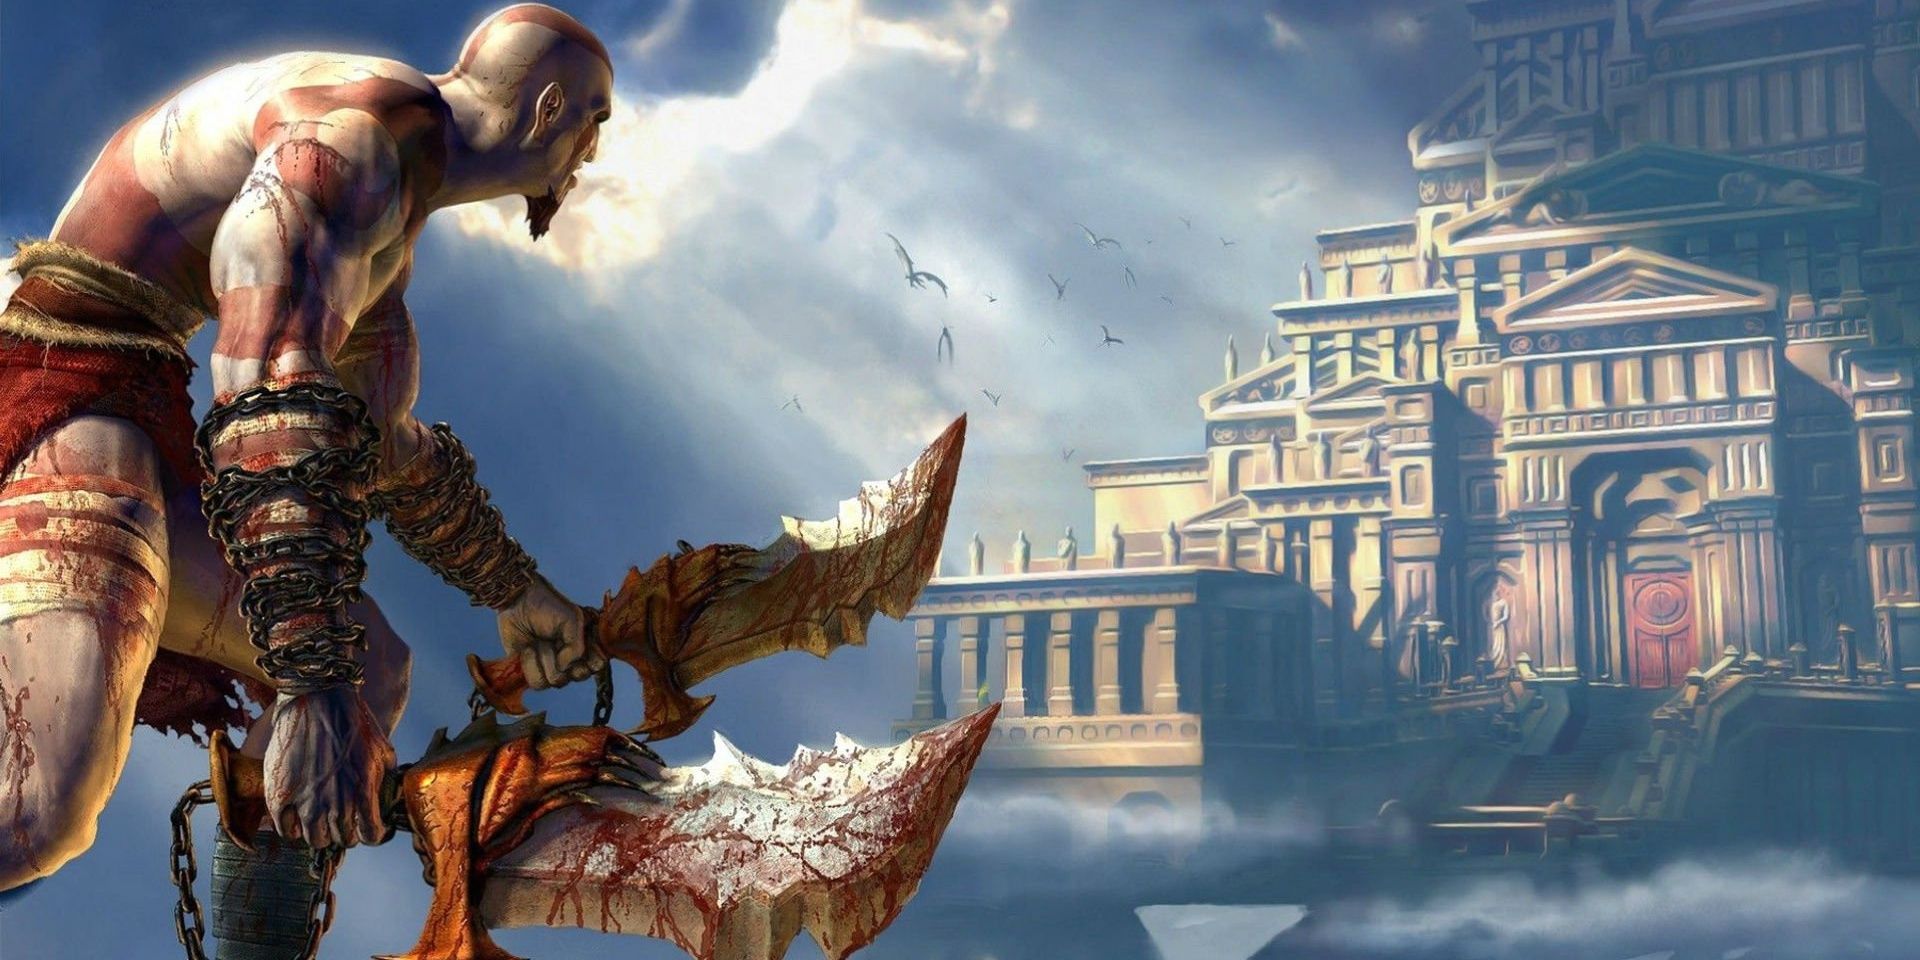 Kratos holding the Blades of Chaos ready to unleash his rage on Olympus.